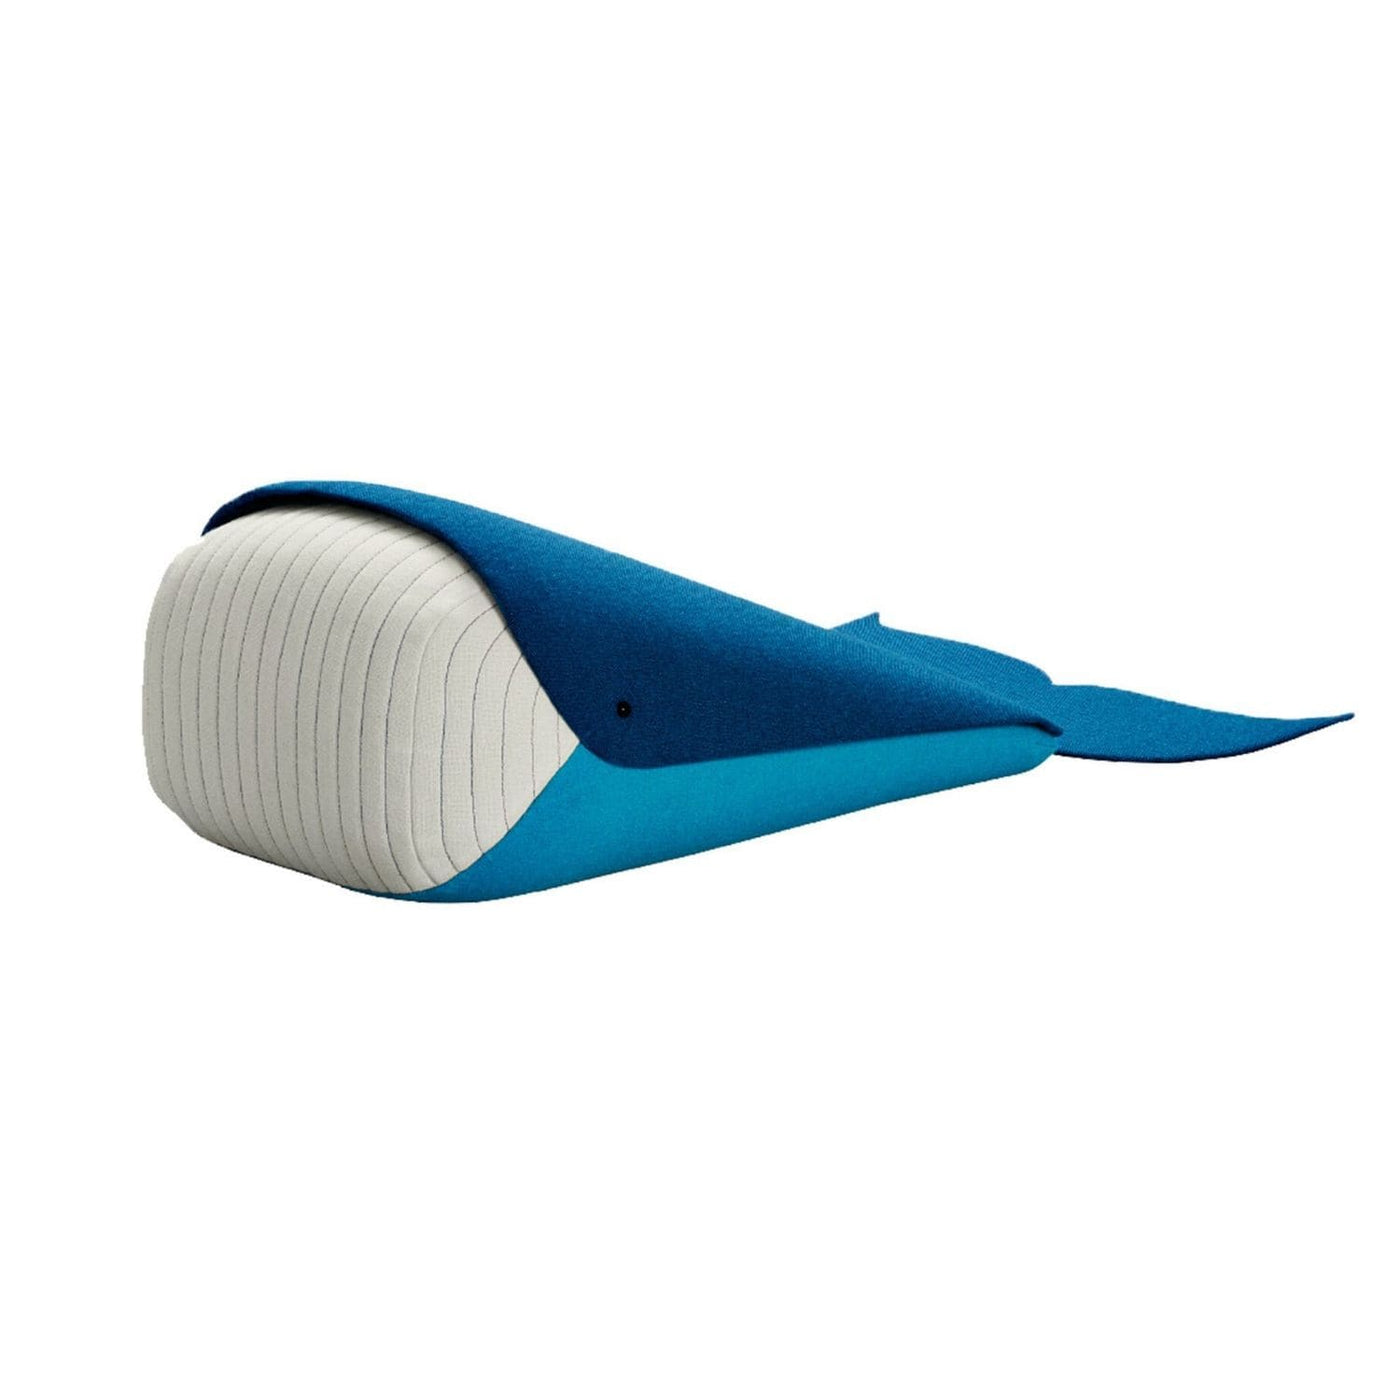 Elements Optimal Whale Cuddle Toy from the zoo collection. Shop now at someday designs